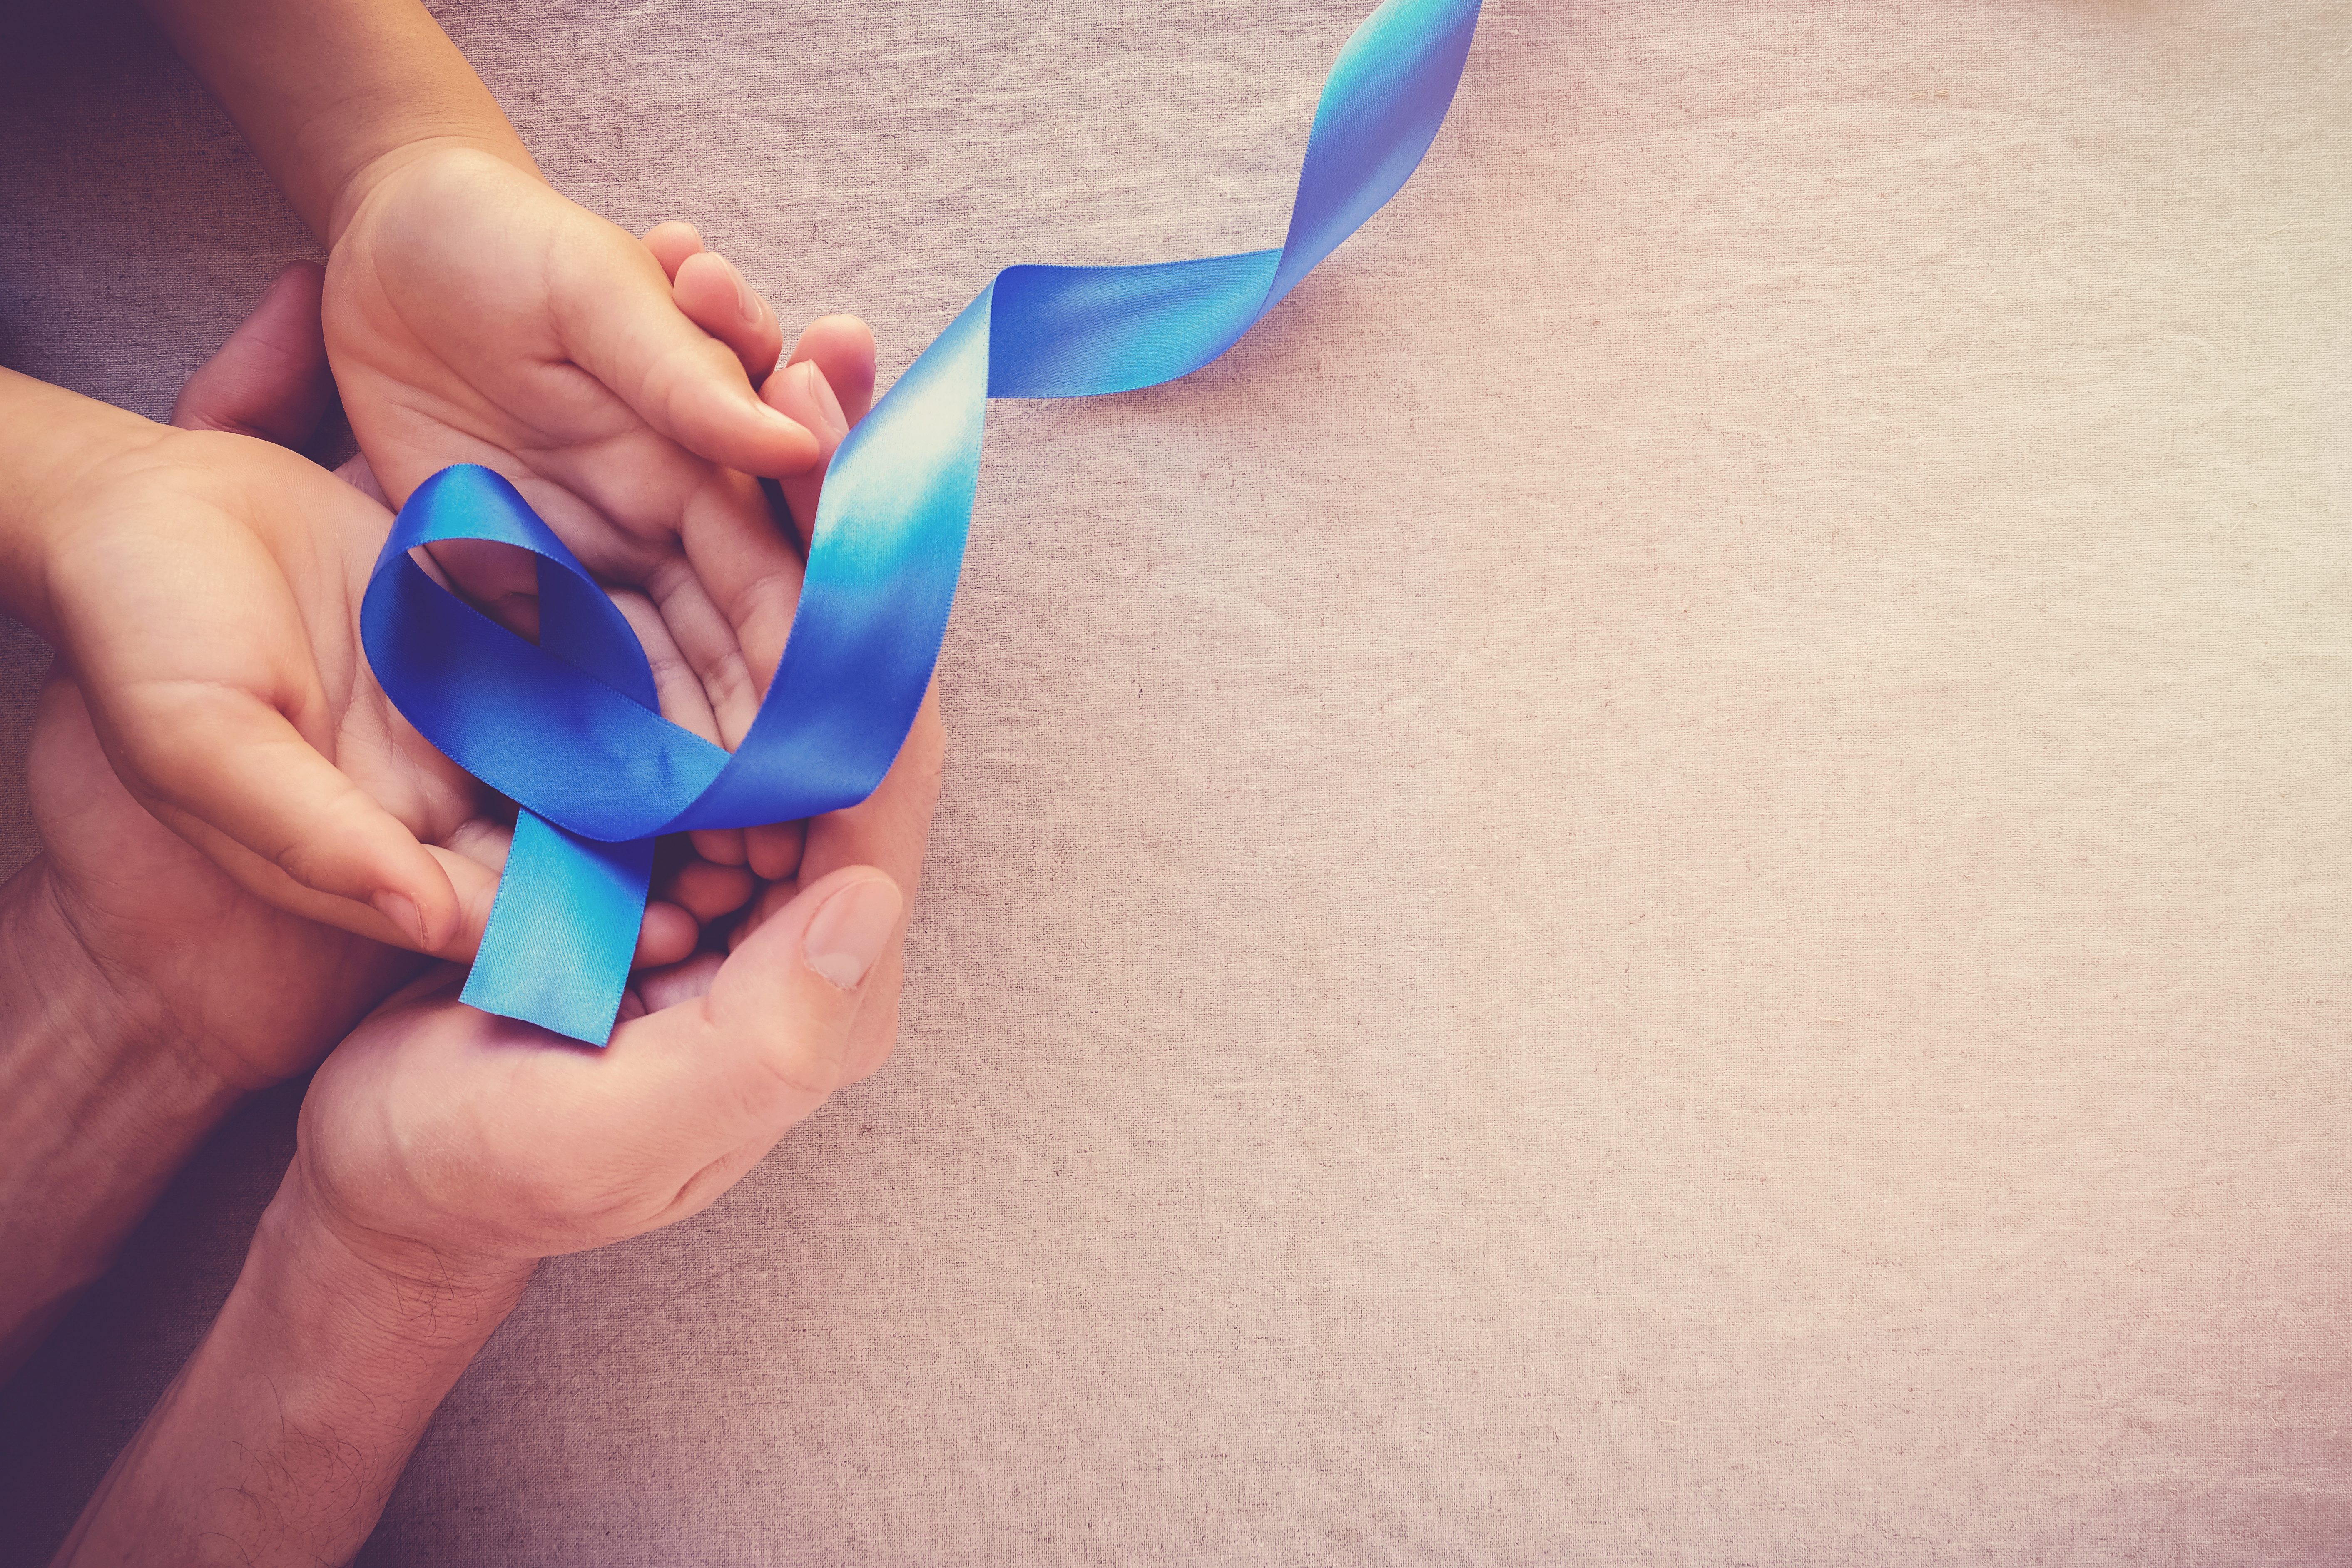 adult and child hands holding Blue ribbon, Colon Cancer, Colorectal Cancer, Child Abuse awareness, world diabetes day